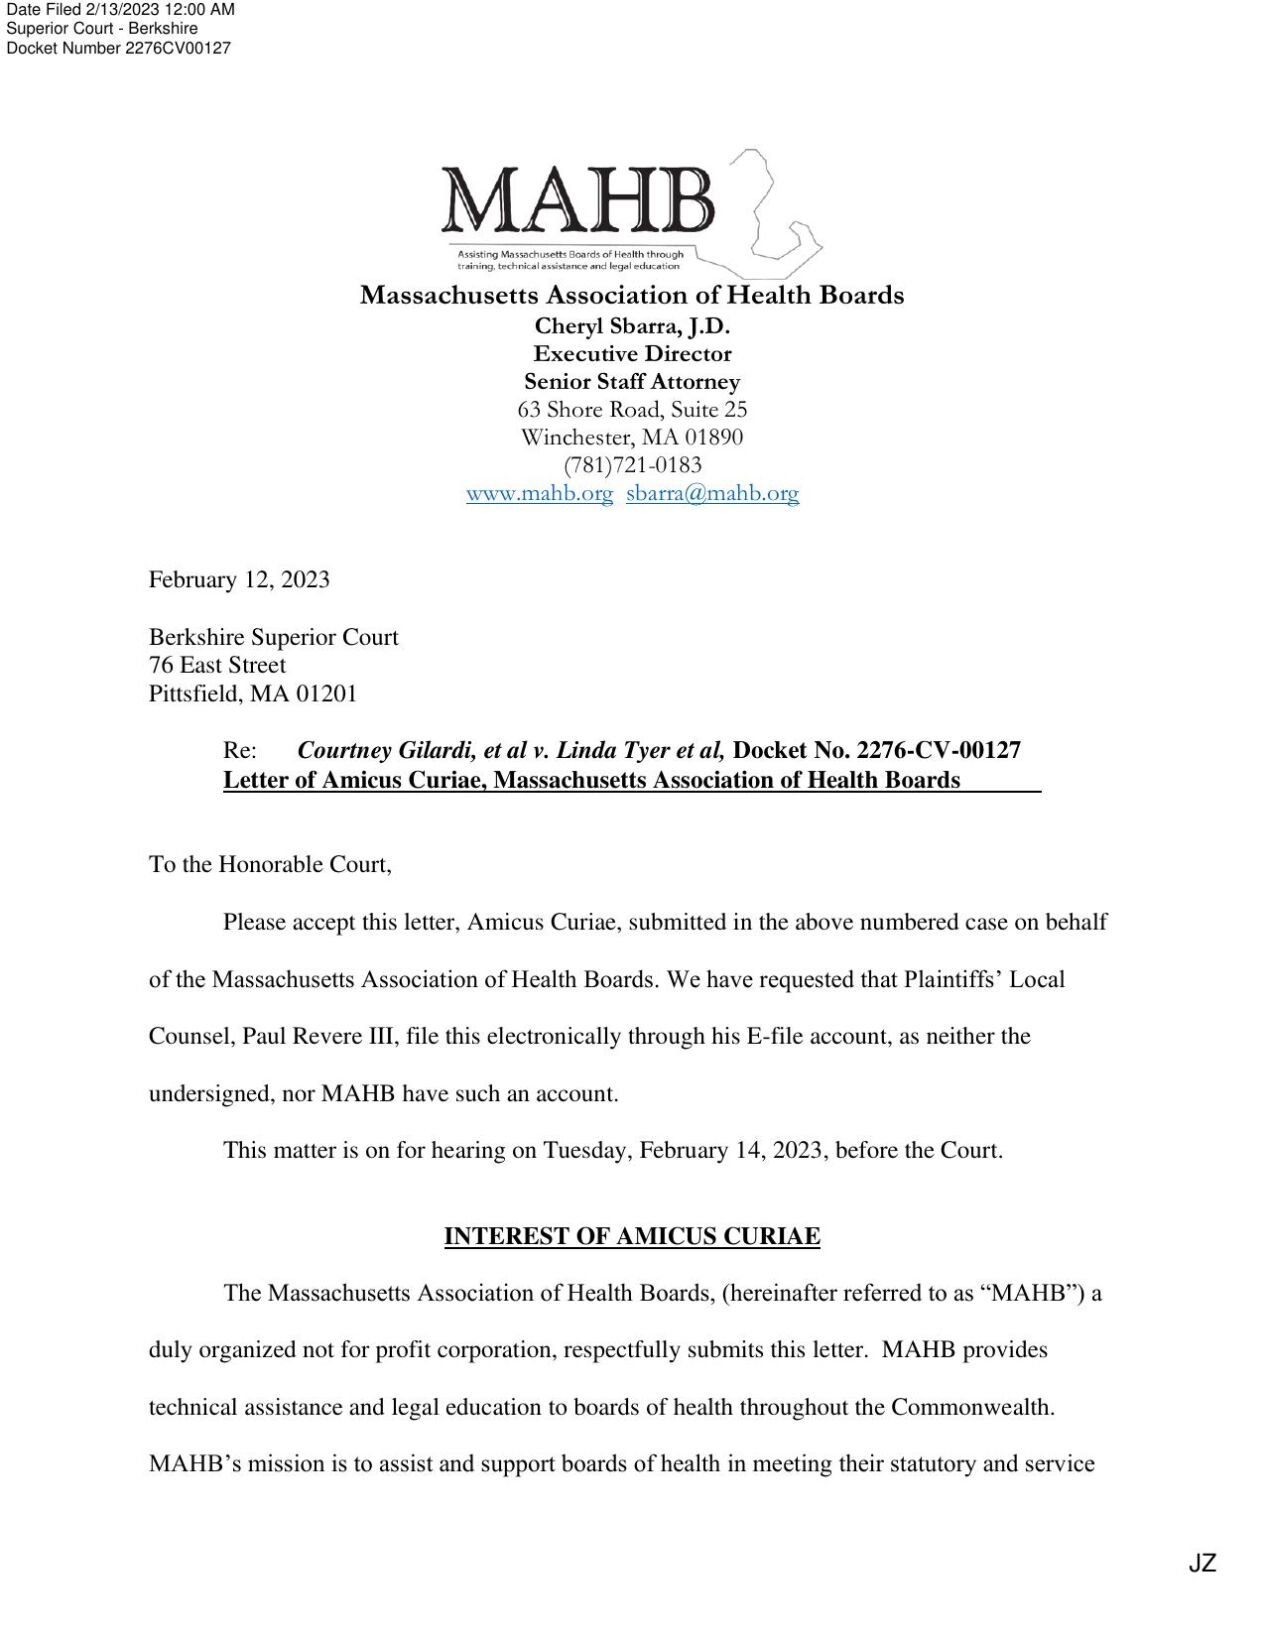 Massachusetts Association of Health Boards amicus brief in cell tower lawsuit